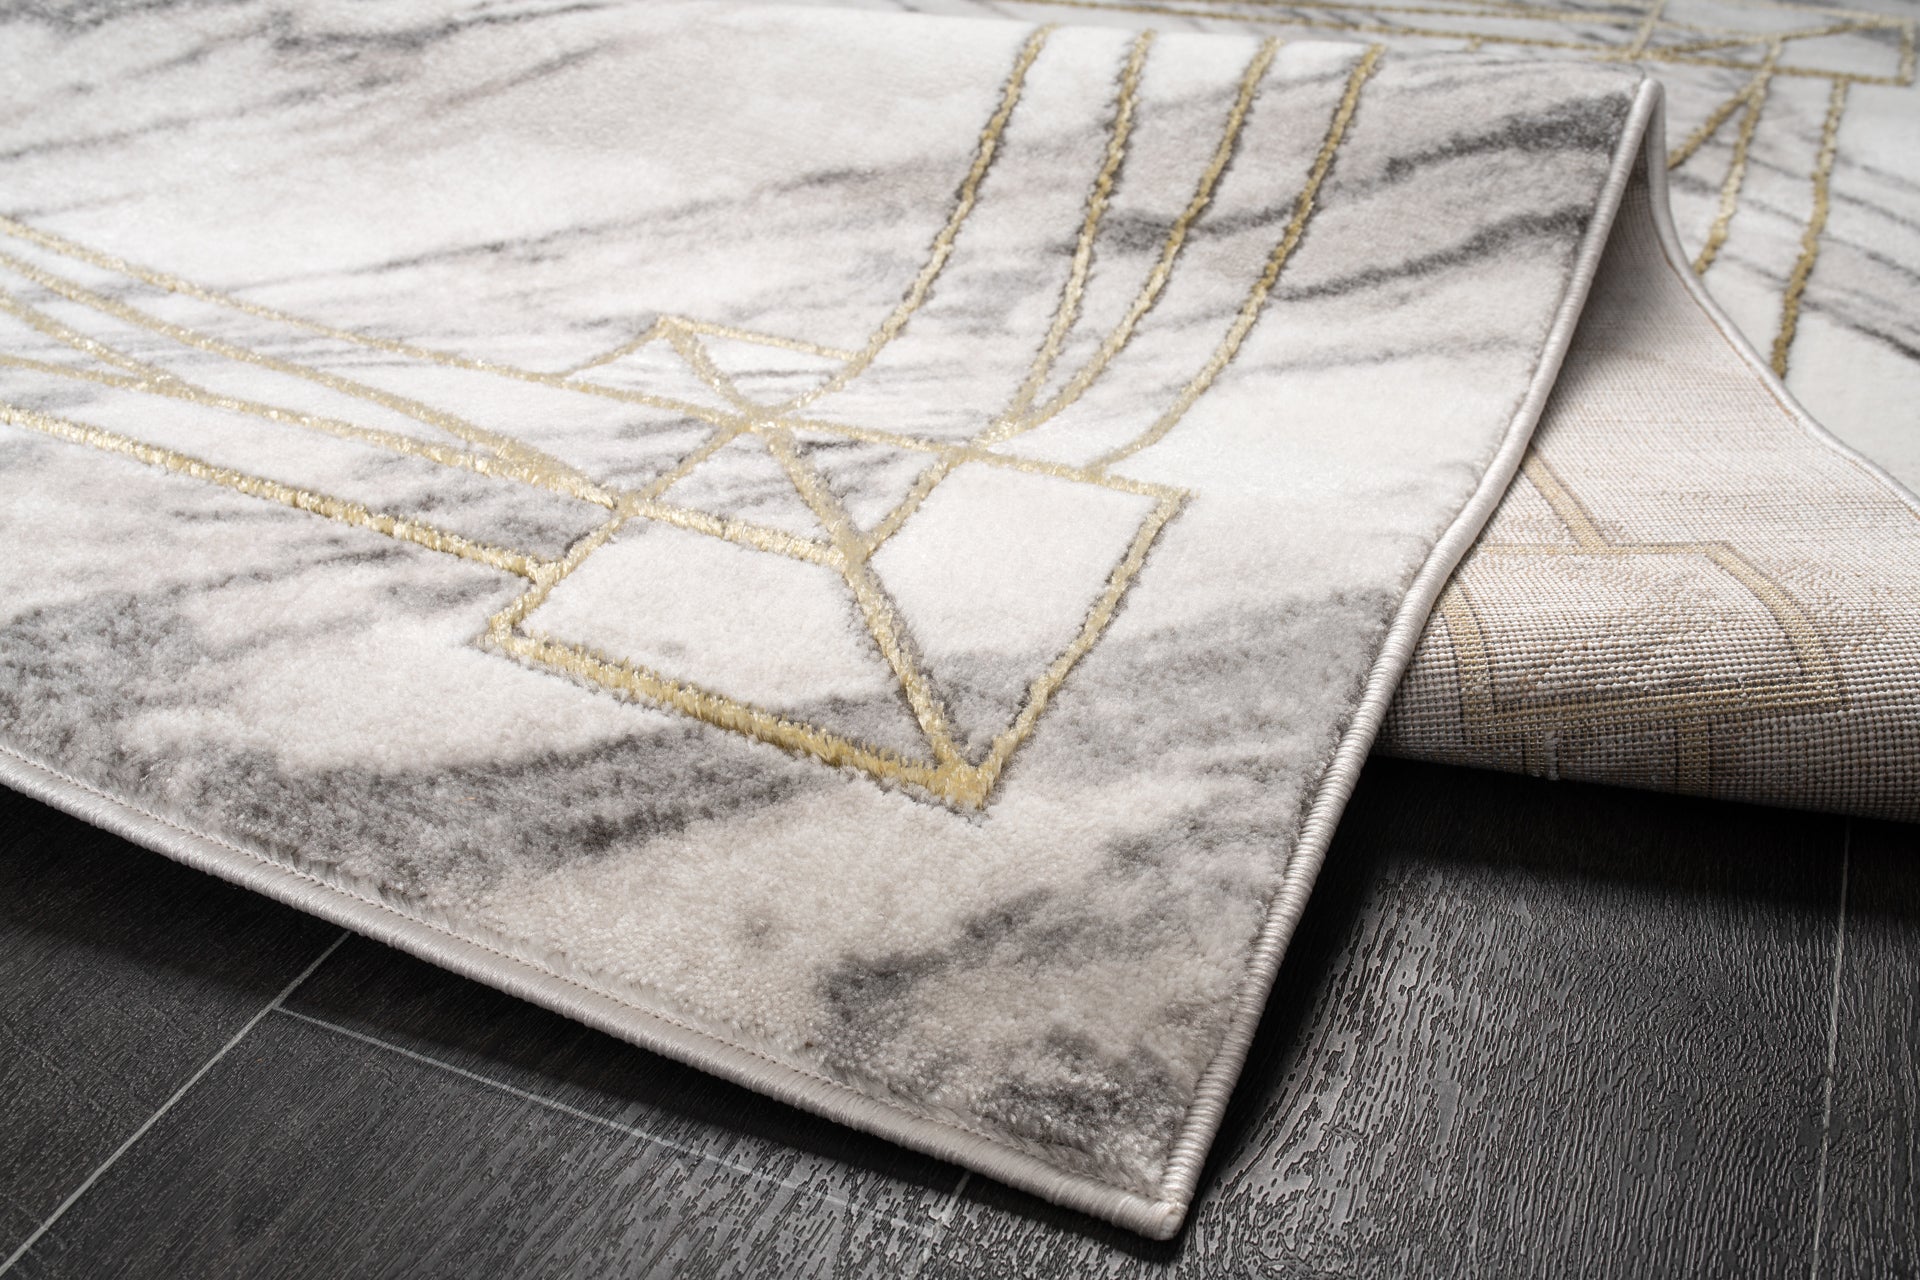 grey gold abstract bordered luxury modern contemporary area rug 4x6, 4x5 ft Small Carpet, Home Office, Living Room, Bedroom